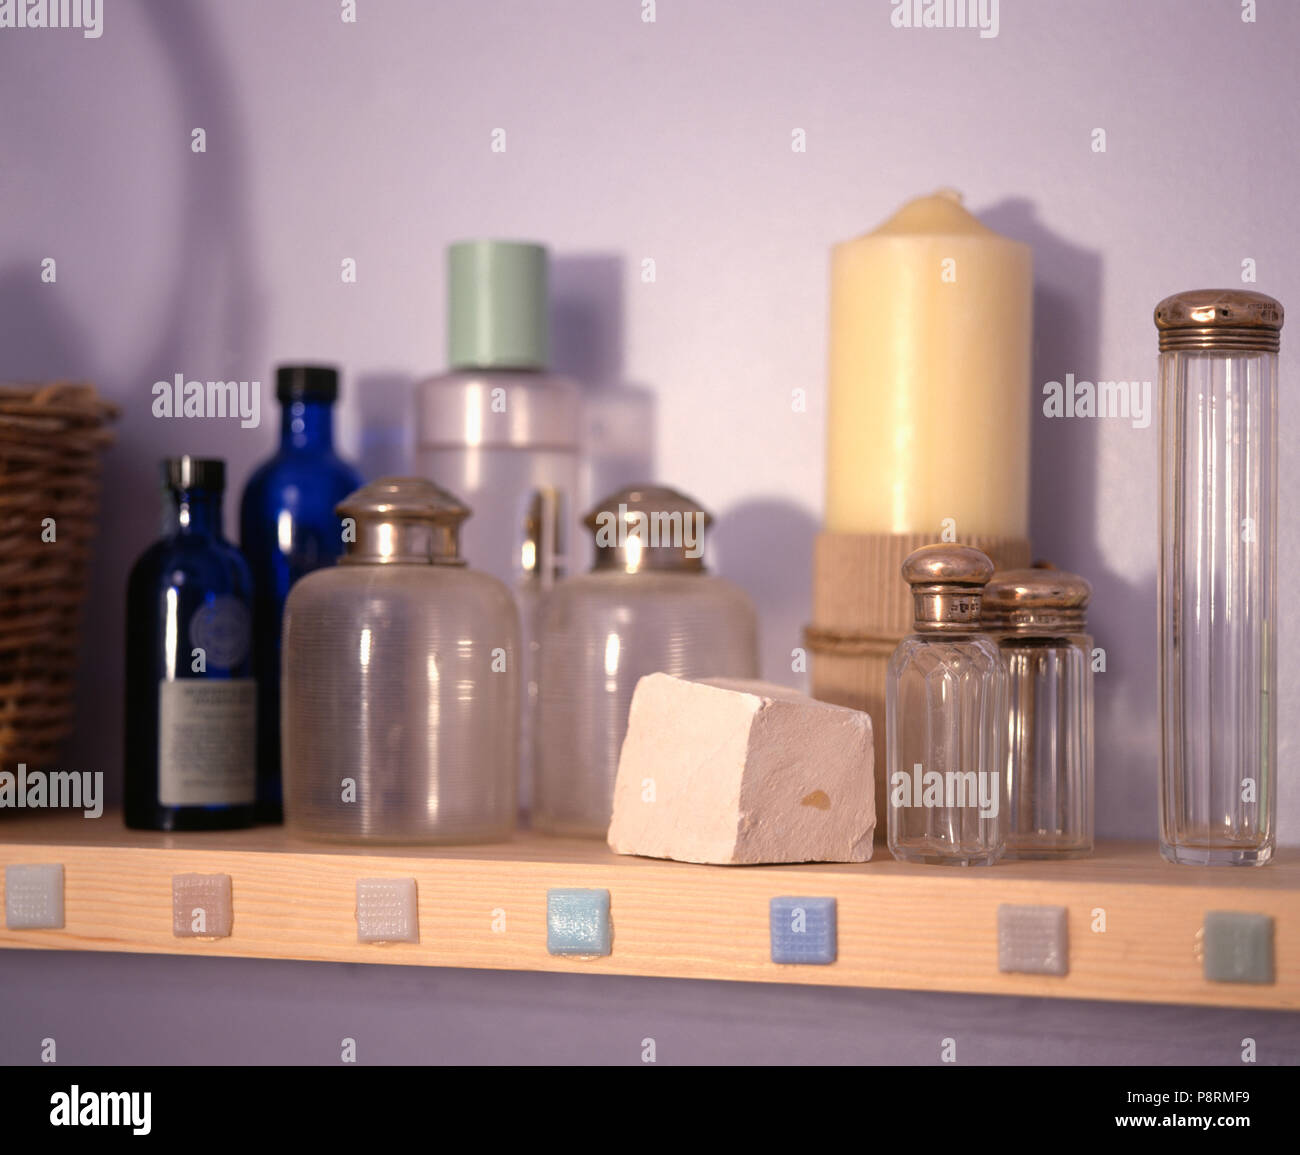 Collection of silver topped storage bottles on bathroom shelf Stock Photo